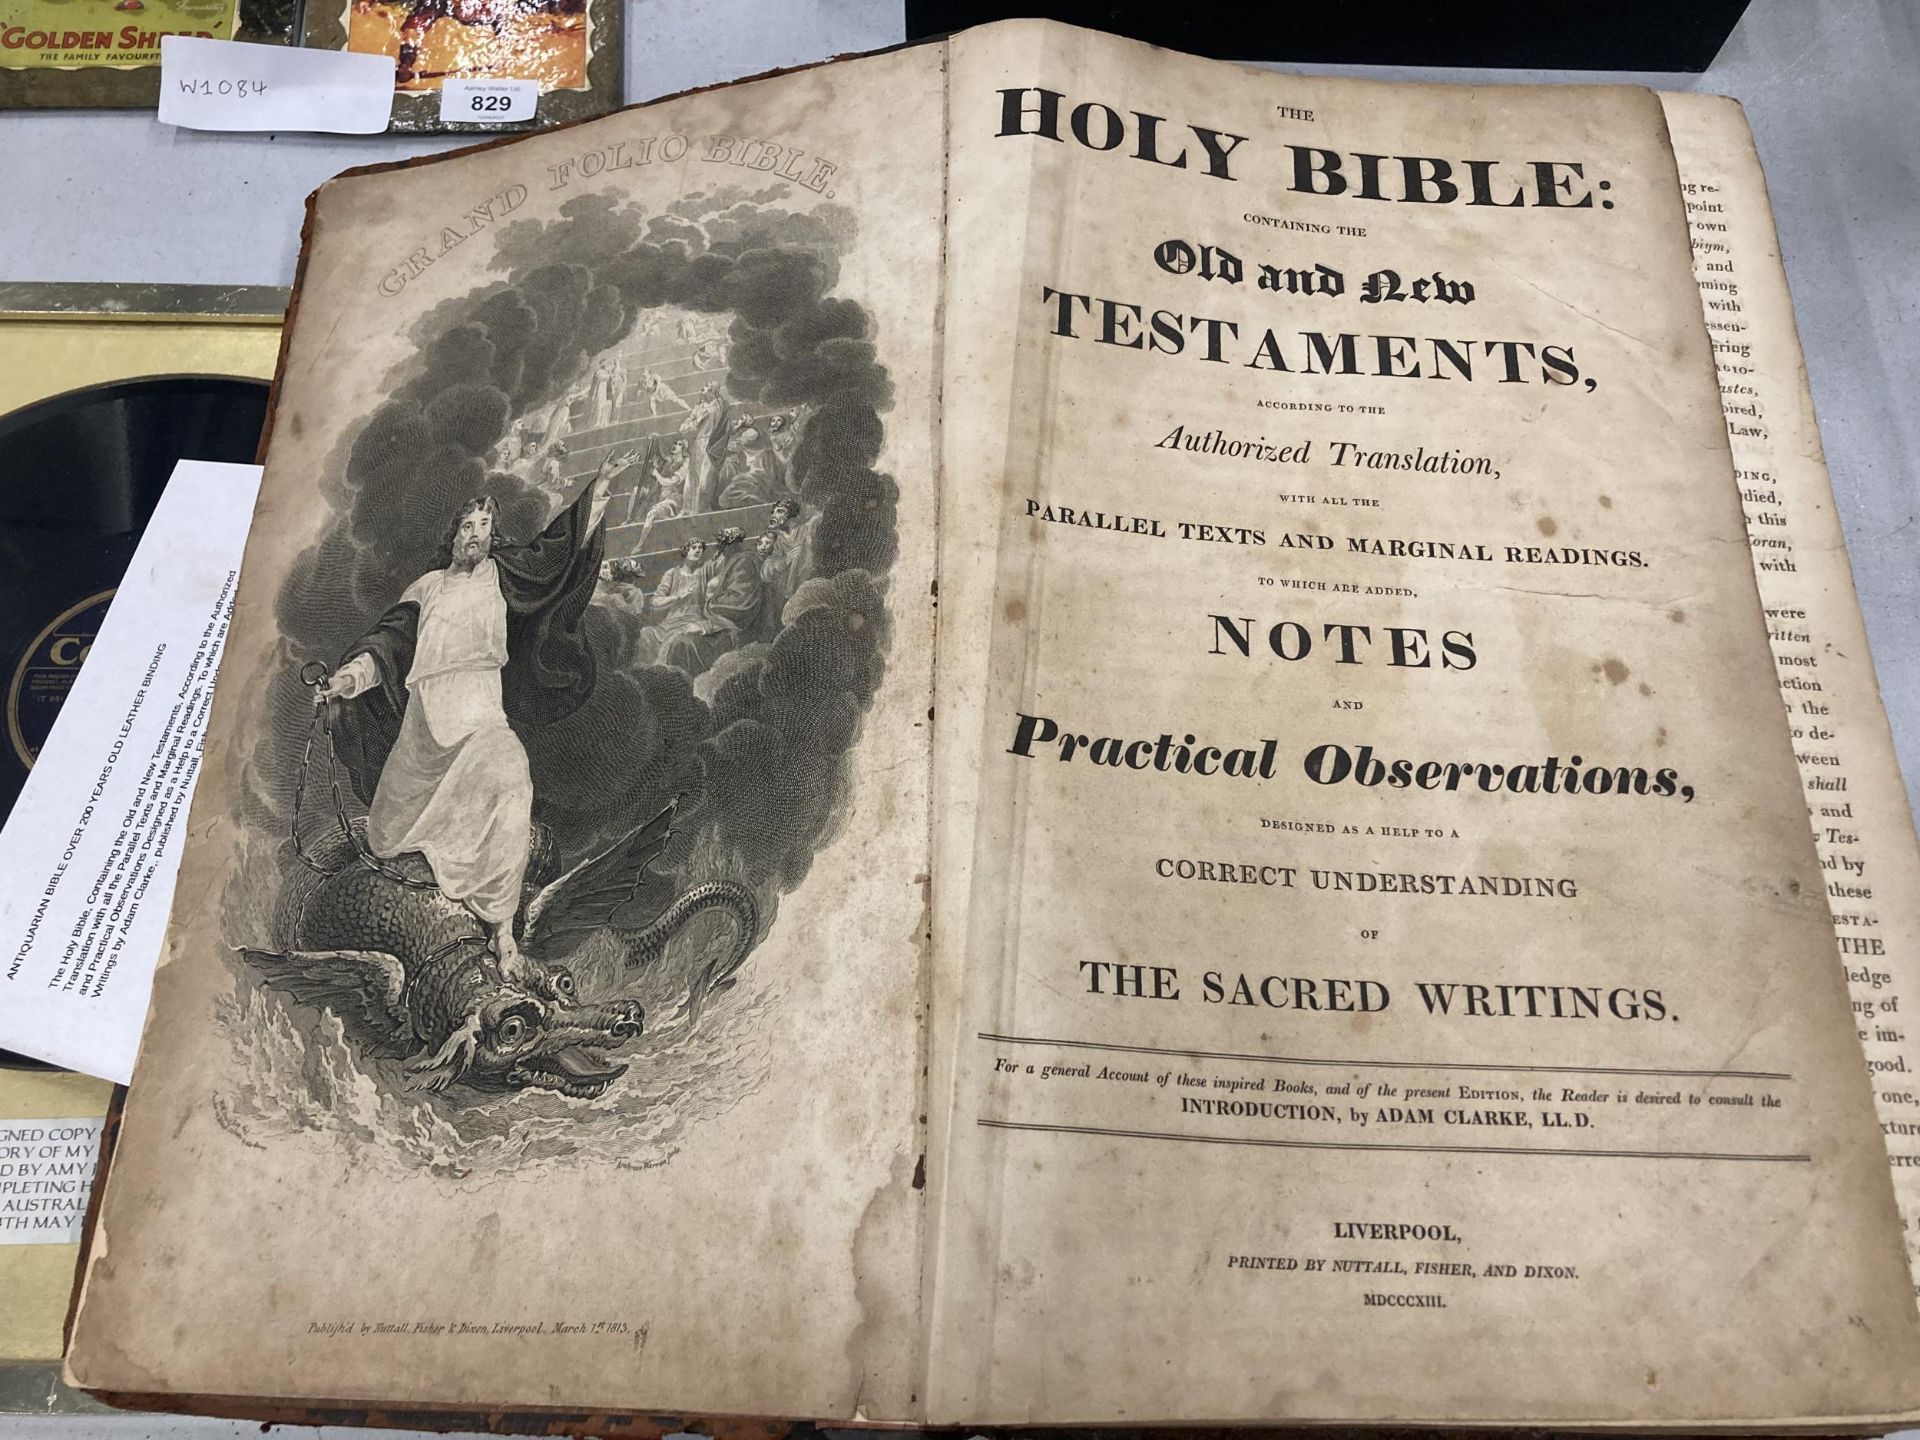 A LARGE ANTIQUARIAN BIBLE OVER 200YEARS OLD PUBLISHED BY NUTTALL, FISHER AND DIXON, LIVERPOOL, 1813 - Image 2 of 7